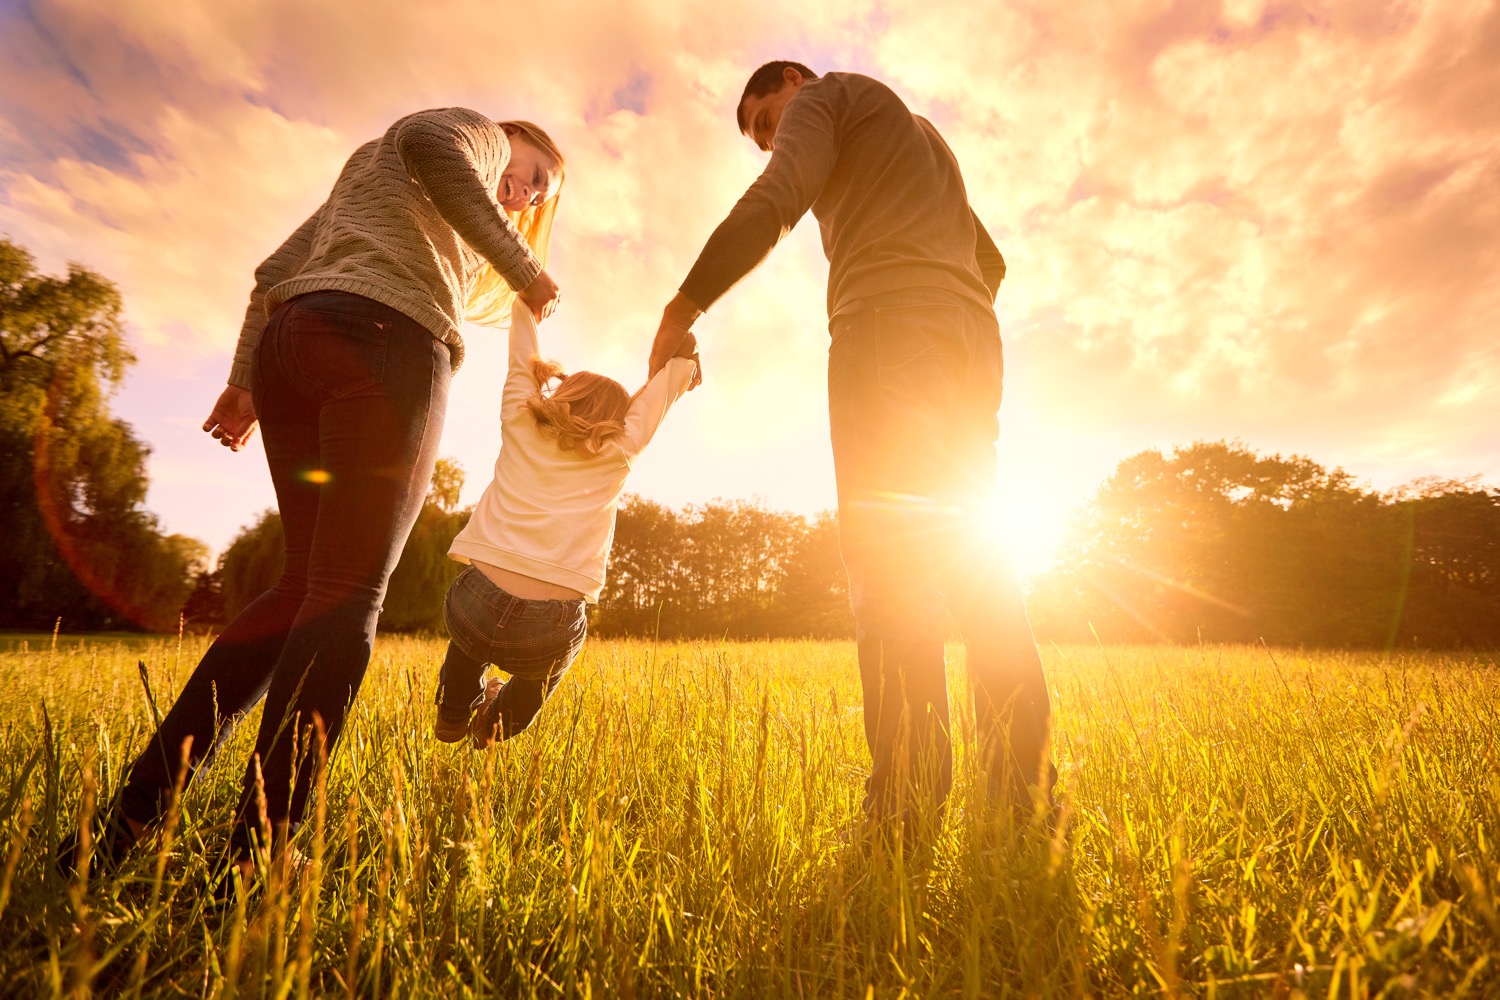 A couple swinging their adopted child through a field at sunset.